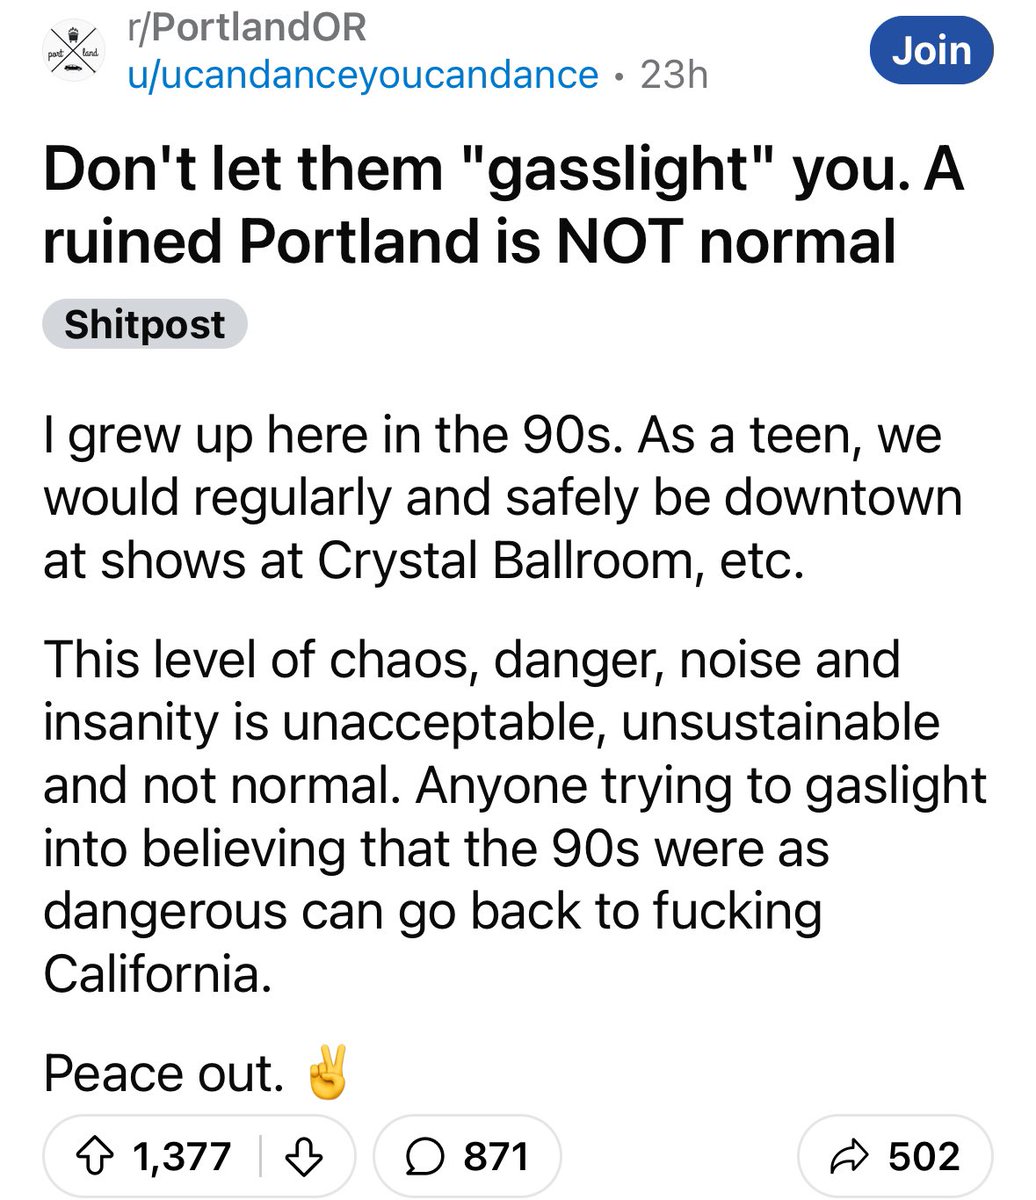 It's not normal. Portland is at zombie apocalypse levels due to leftist policy fails.